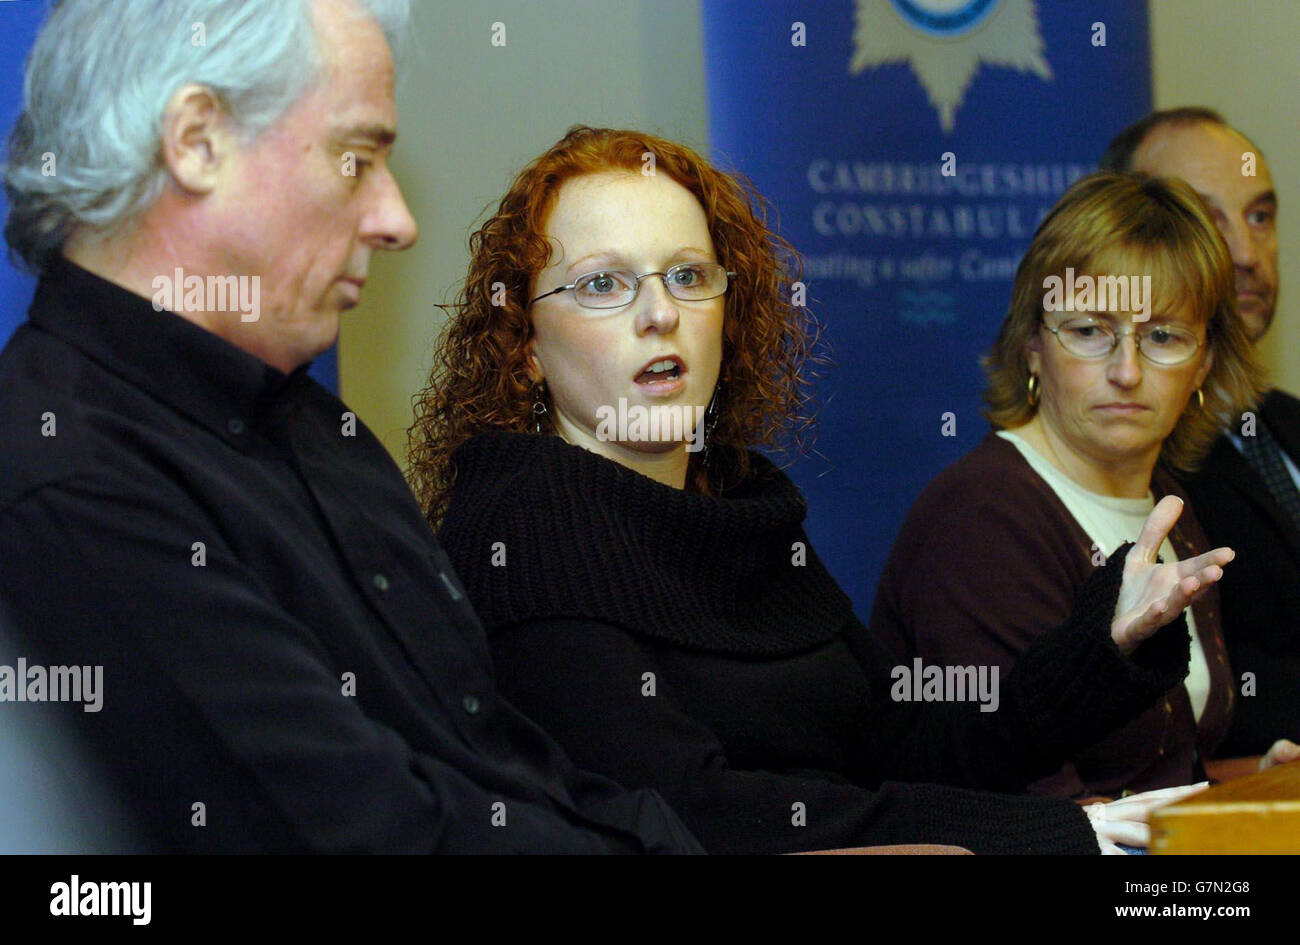 Julie Geeson, 22, twin sister of missing student Sally Geeson, speaks at a press conference alongside her parents Laurence and Sue Geeson. Missing student Sally Geeson, 22, was last seen at the Avery Pub on Regent Street in Cambridge after a night out with friends on New Years Eve. Stock Photo